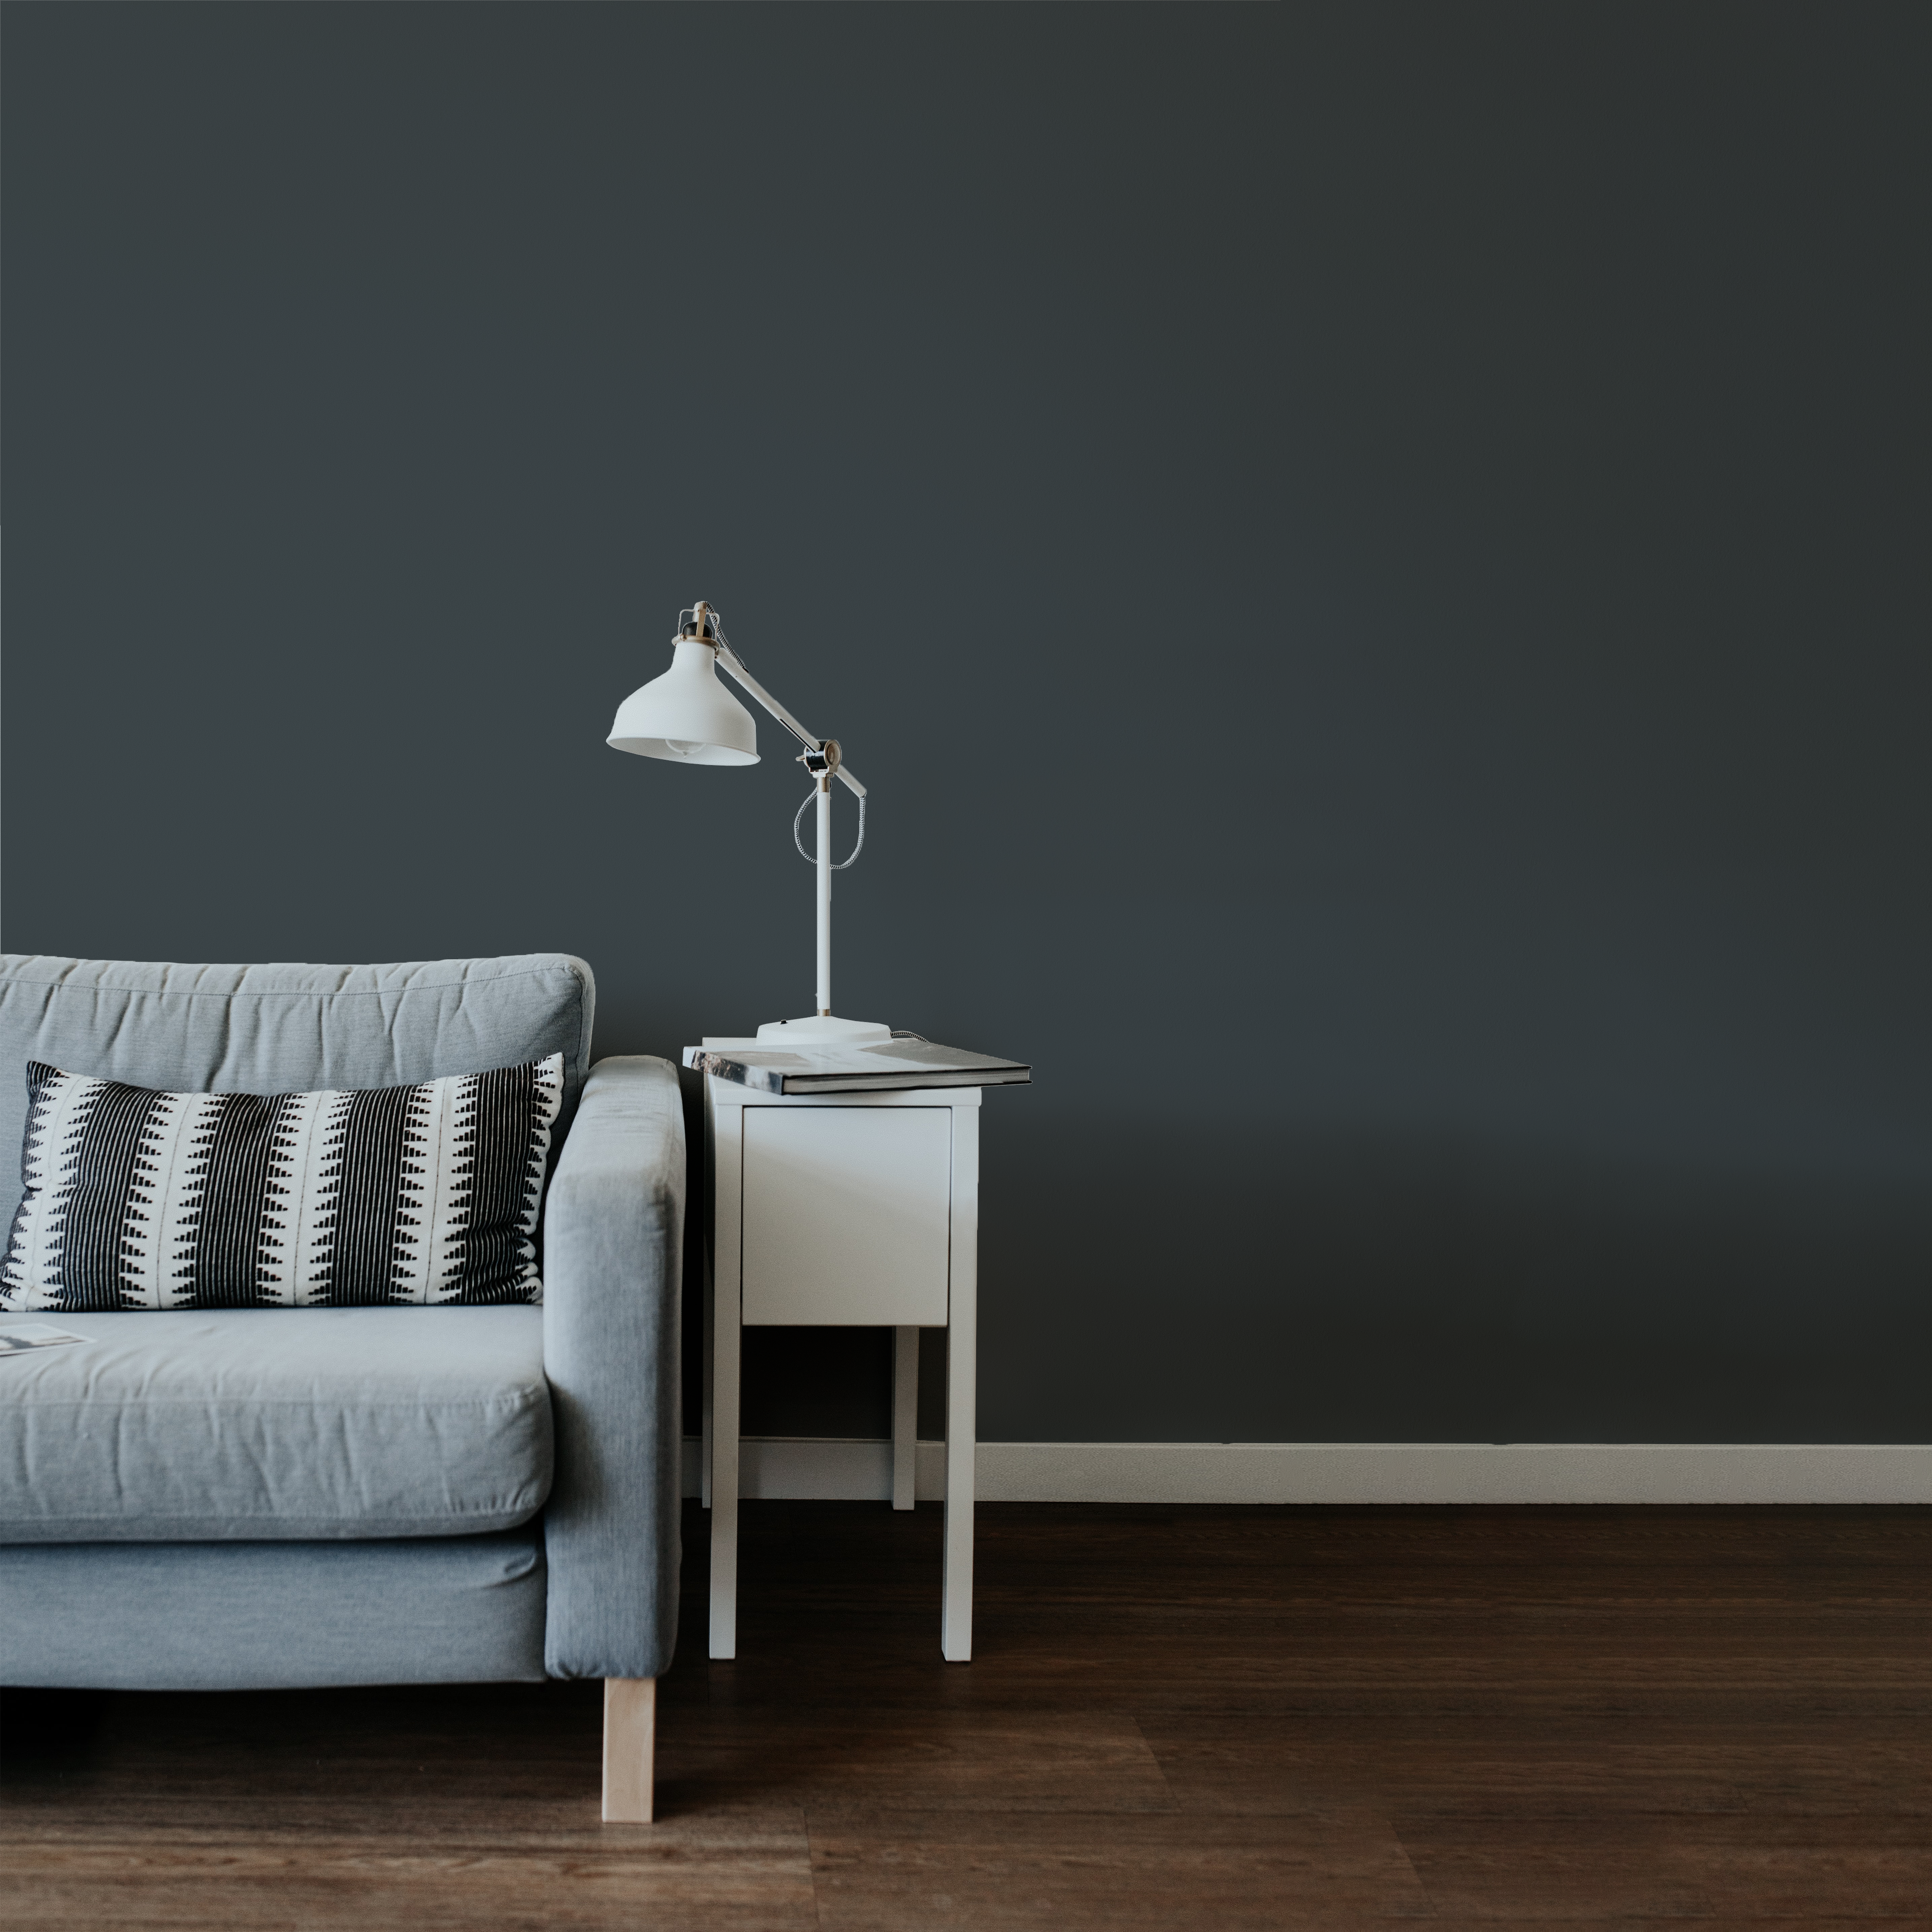 Charcoal Grey - Wall Paint